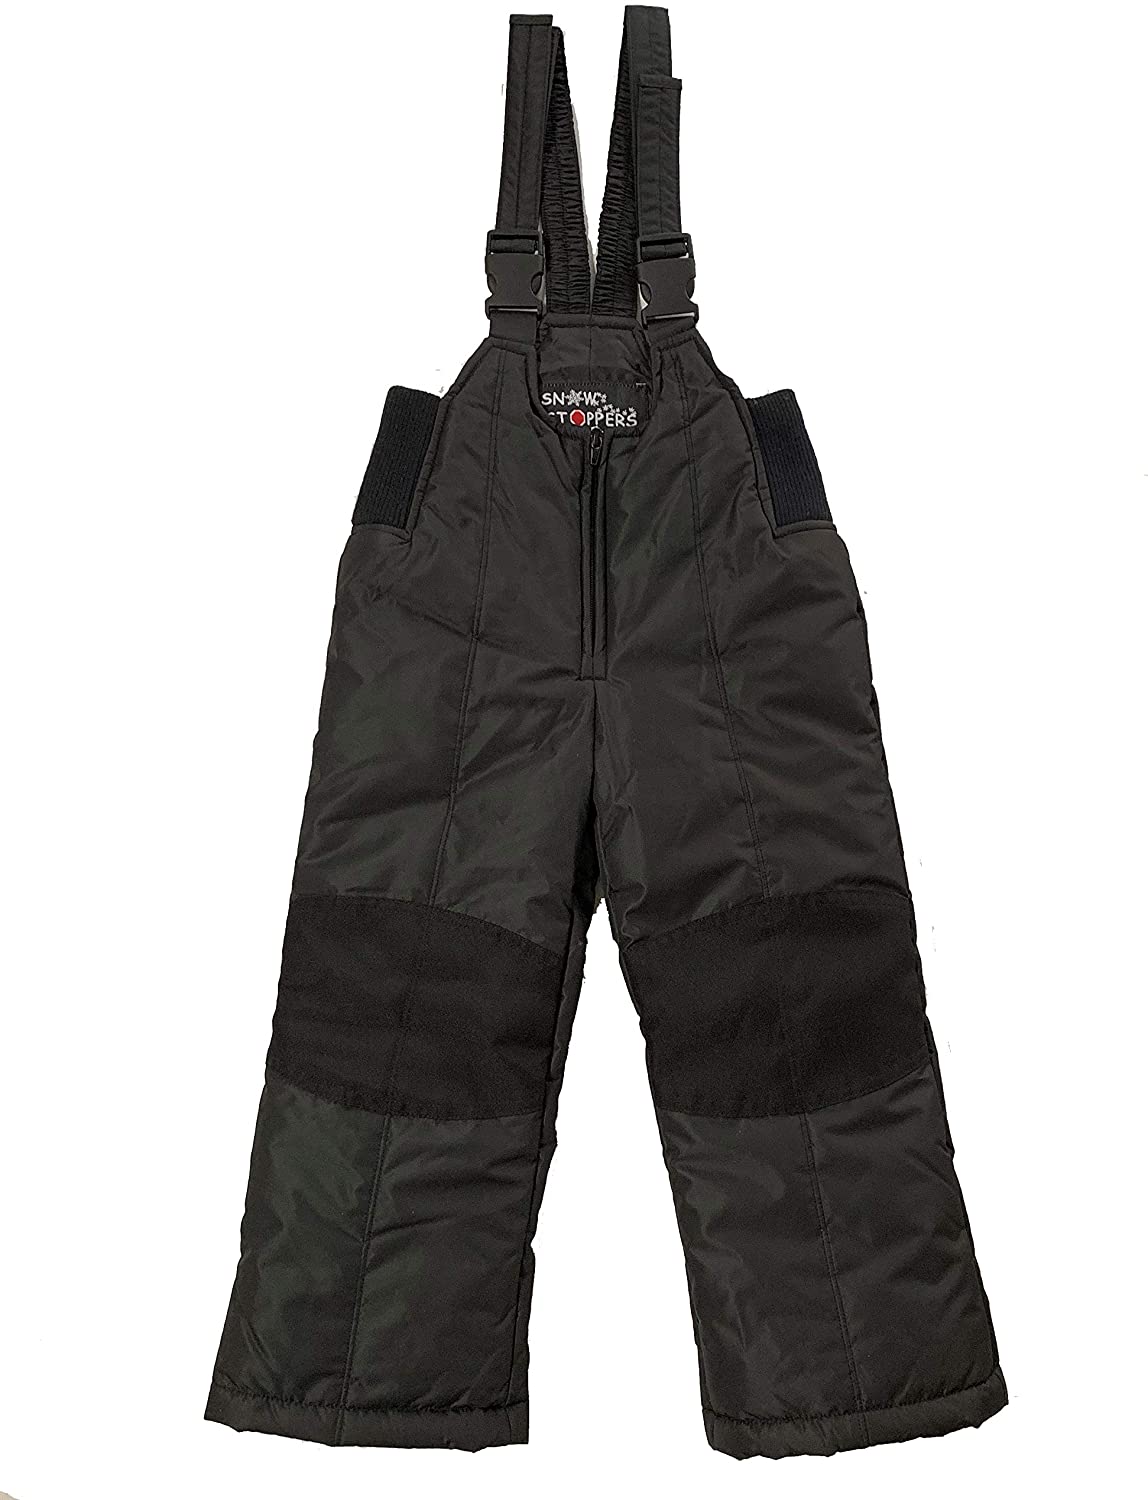 What To Wear Under Ski Pants or Snowboard Pants